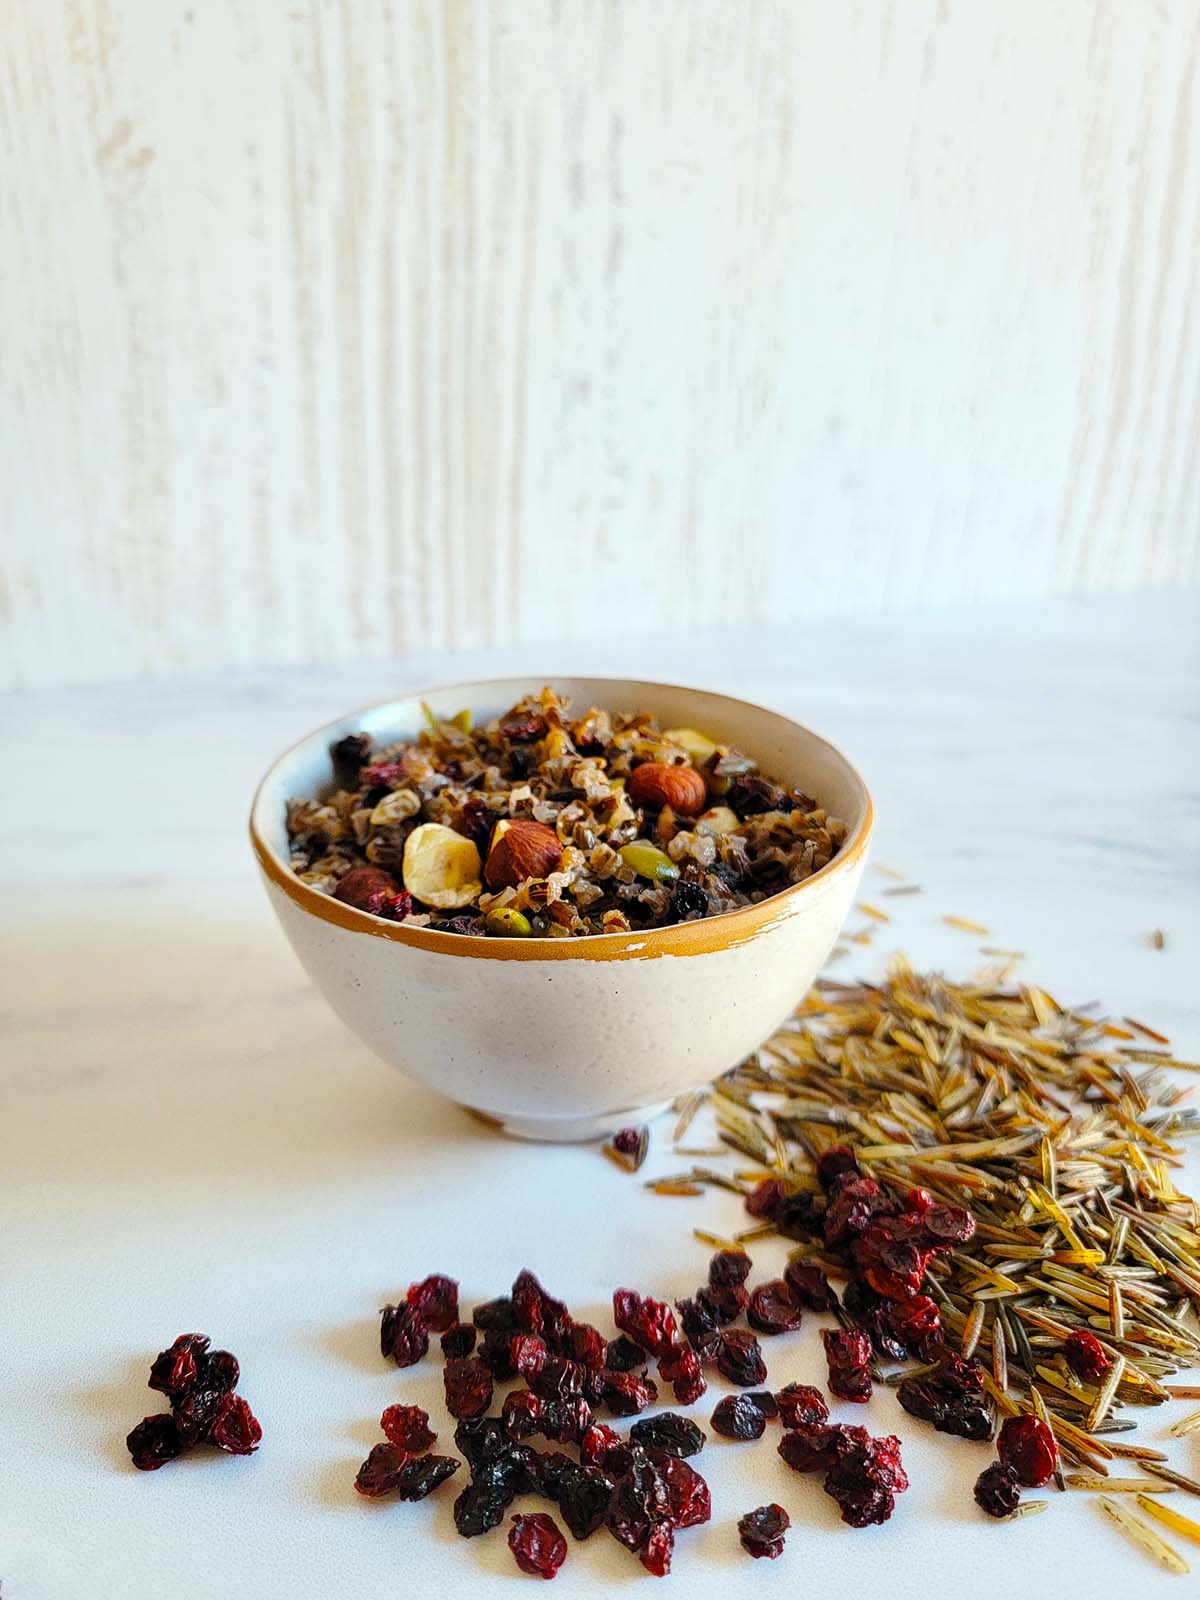 Wild rice porridge with uncooked wild rice and dried lingonberries alongside. 